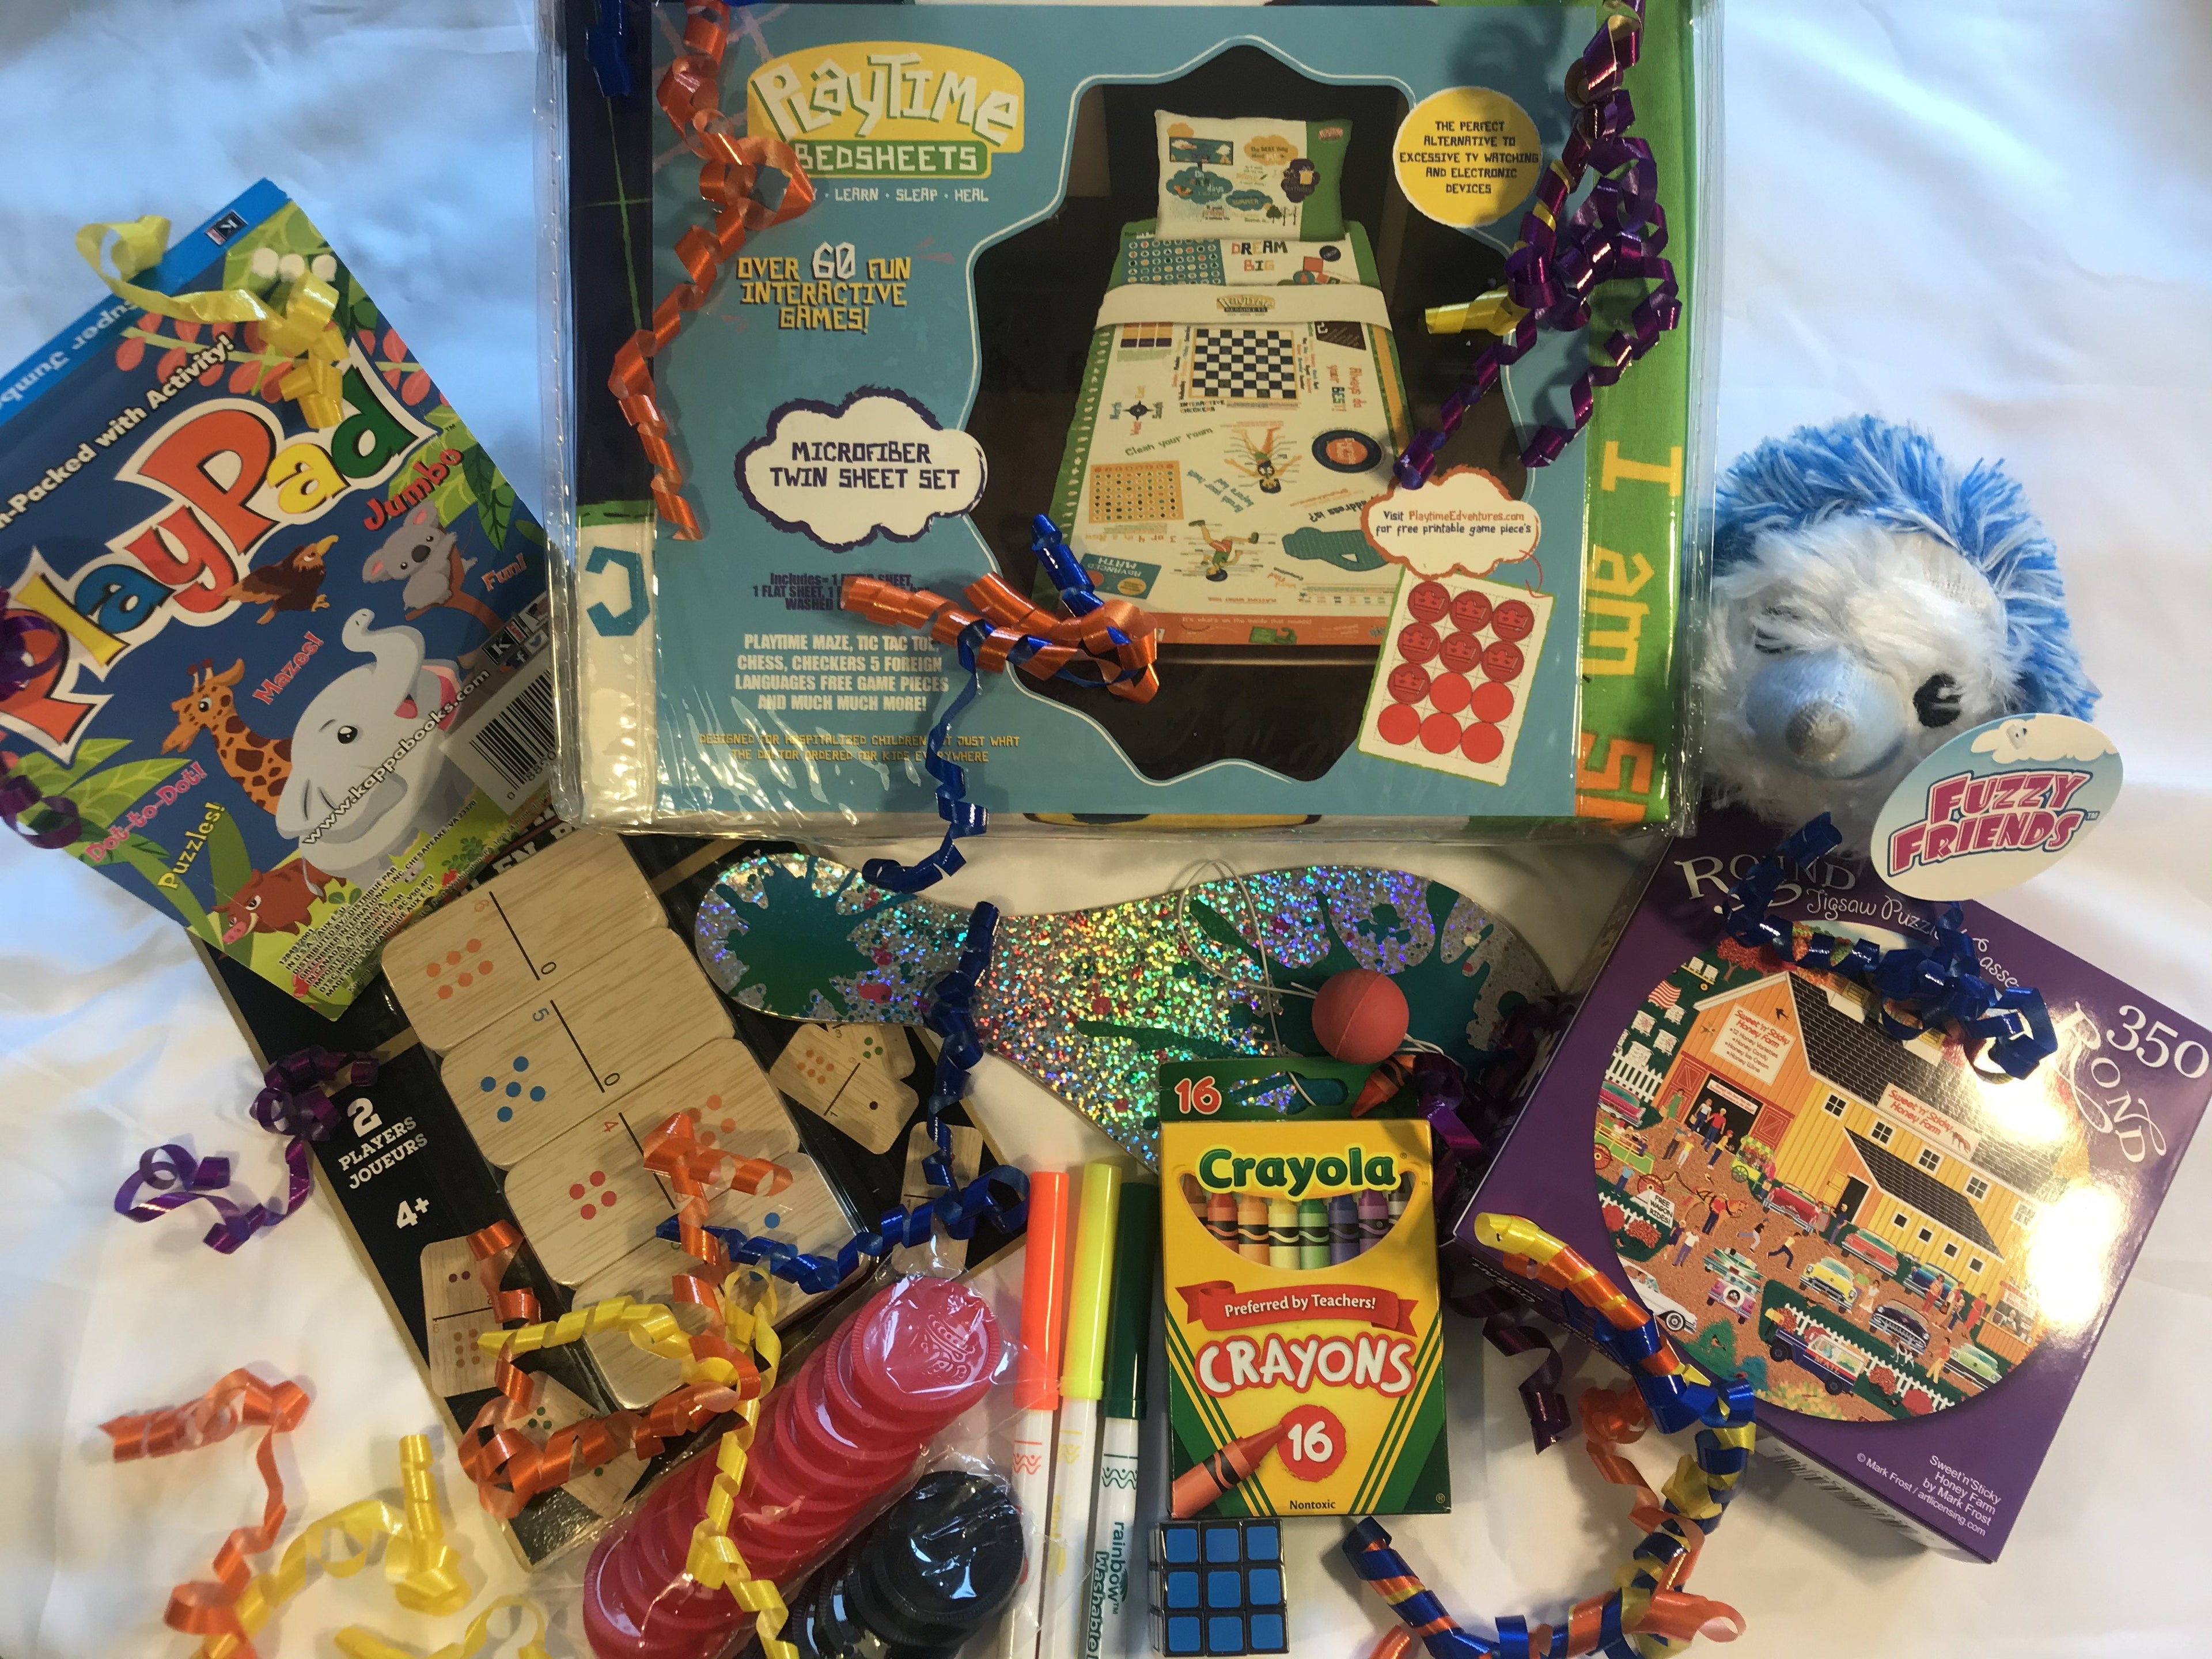 Companies purchase Playtime distraction kits to donate to childrens Hospitals and shelters